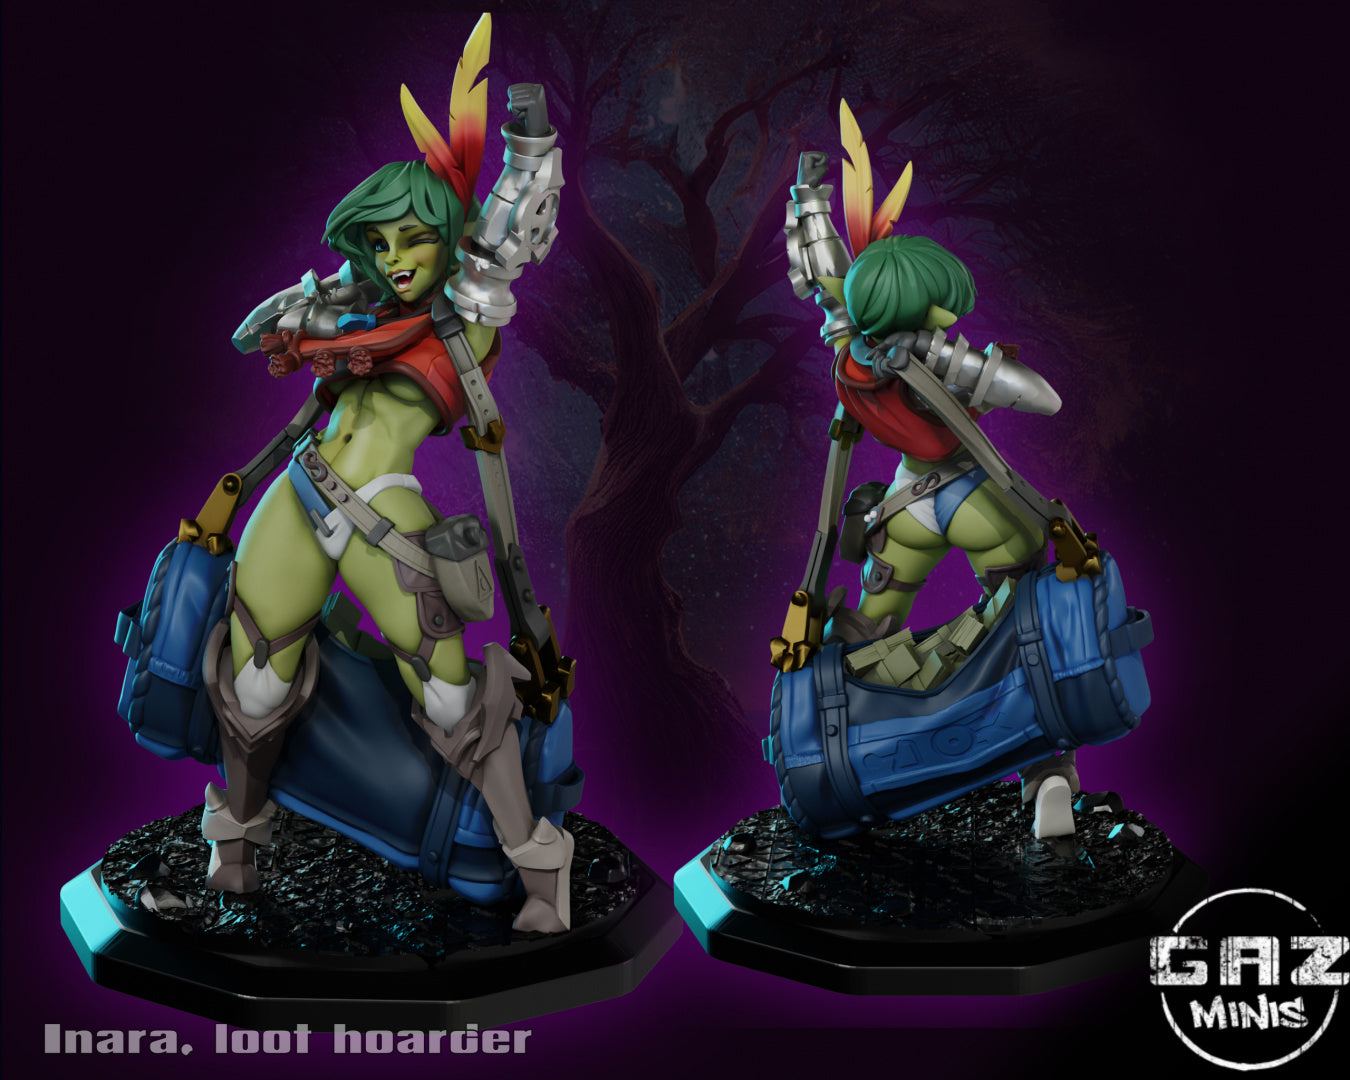 Irena the Loot Hoarder from GAZ Minis